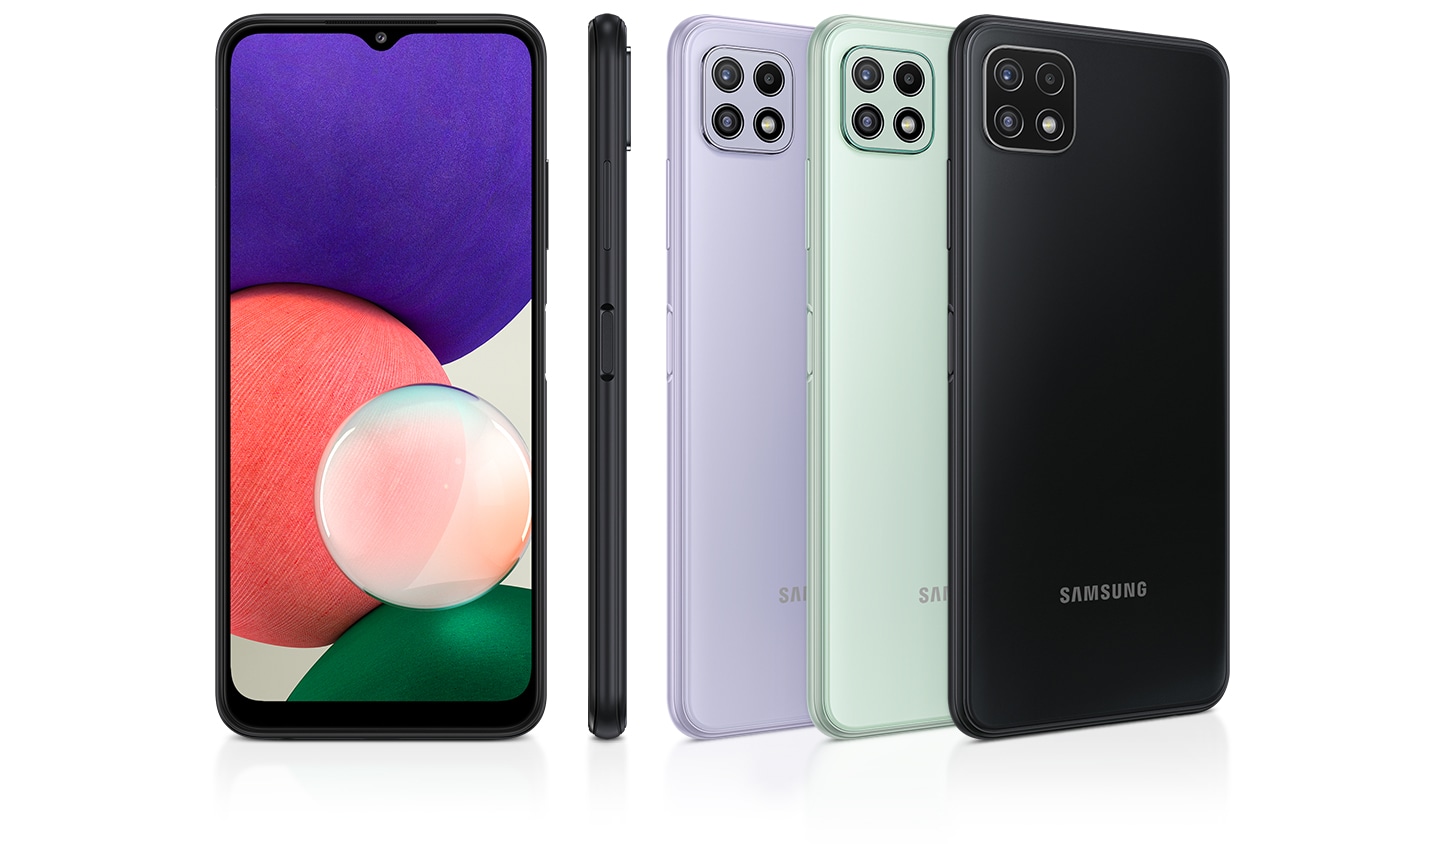 Four a22 6g smartphones in gray, white, mint, and violet, along with a profile and front view highlighting the premium gloss finish.